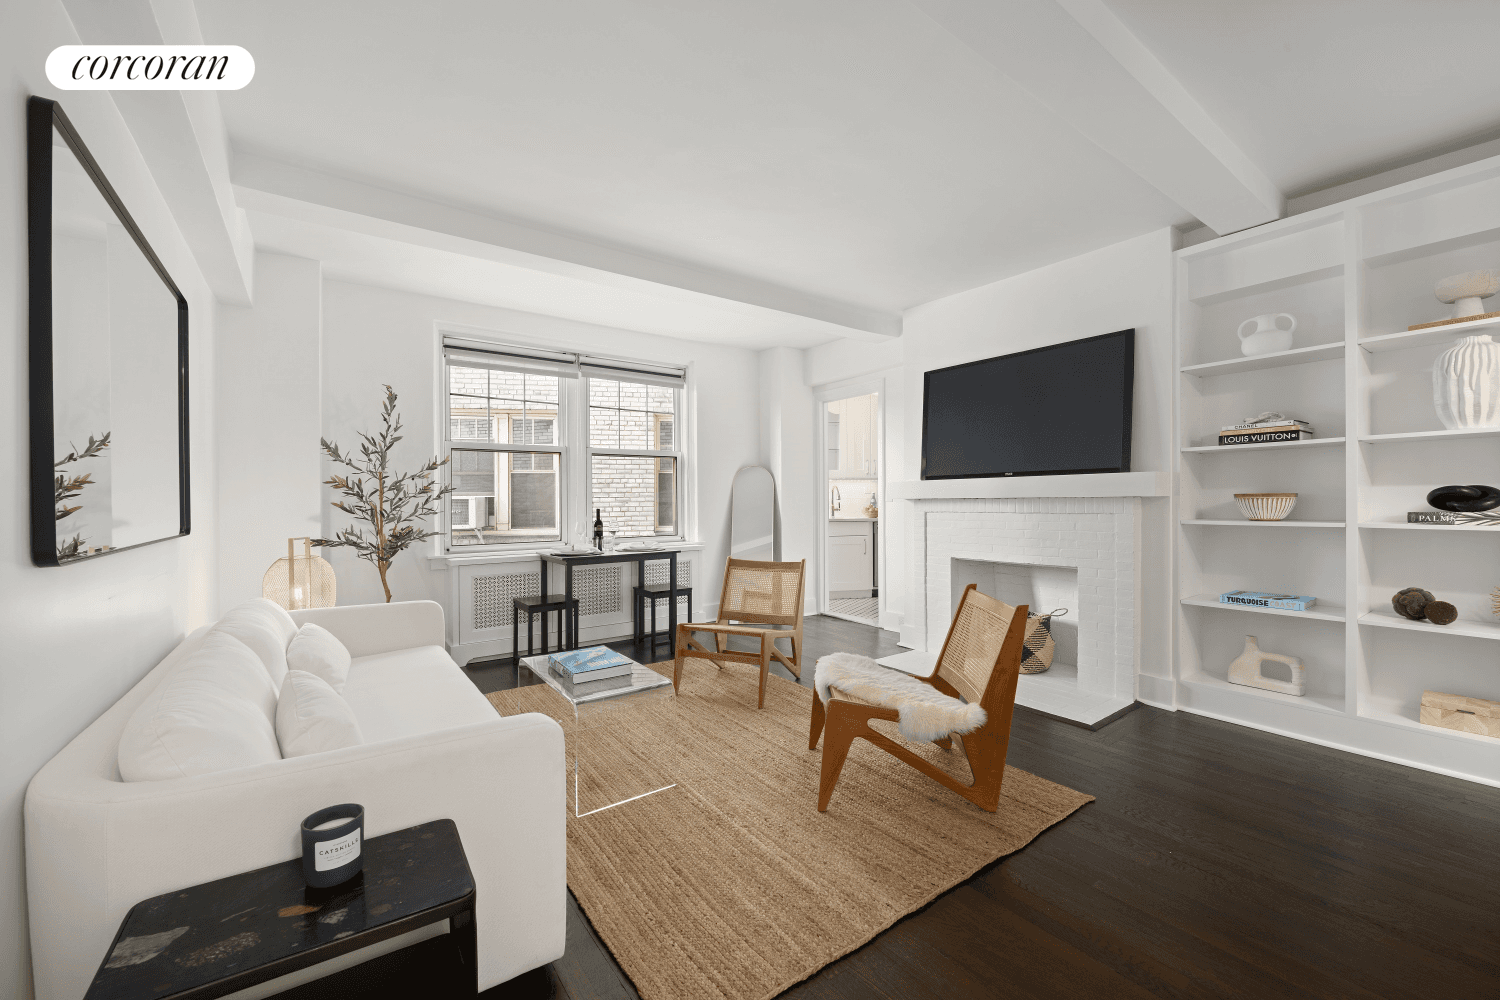 NEWLY RENOVATED South East facing move in ready studio located on the 9th floor of the building in the heart of the West Village.